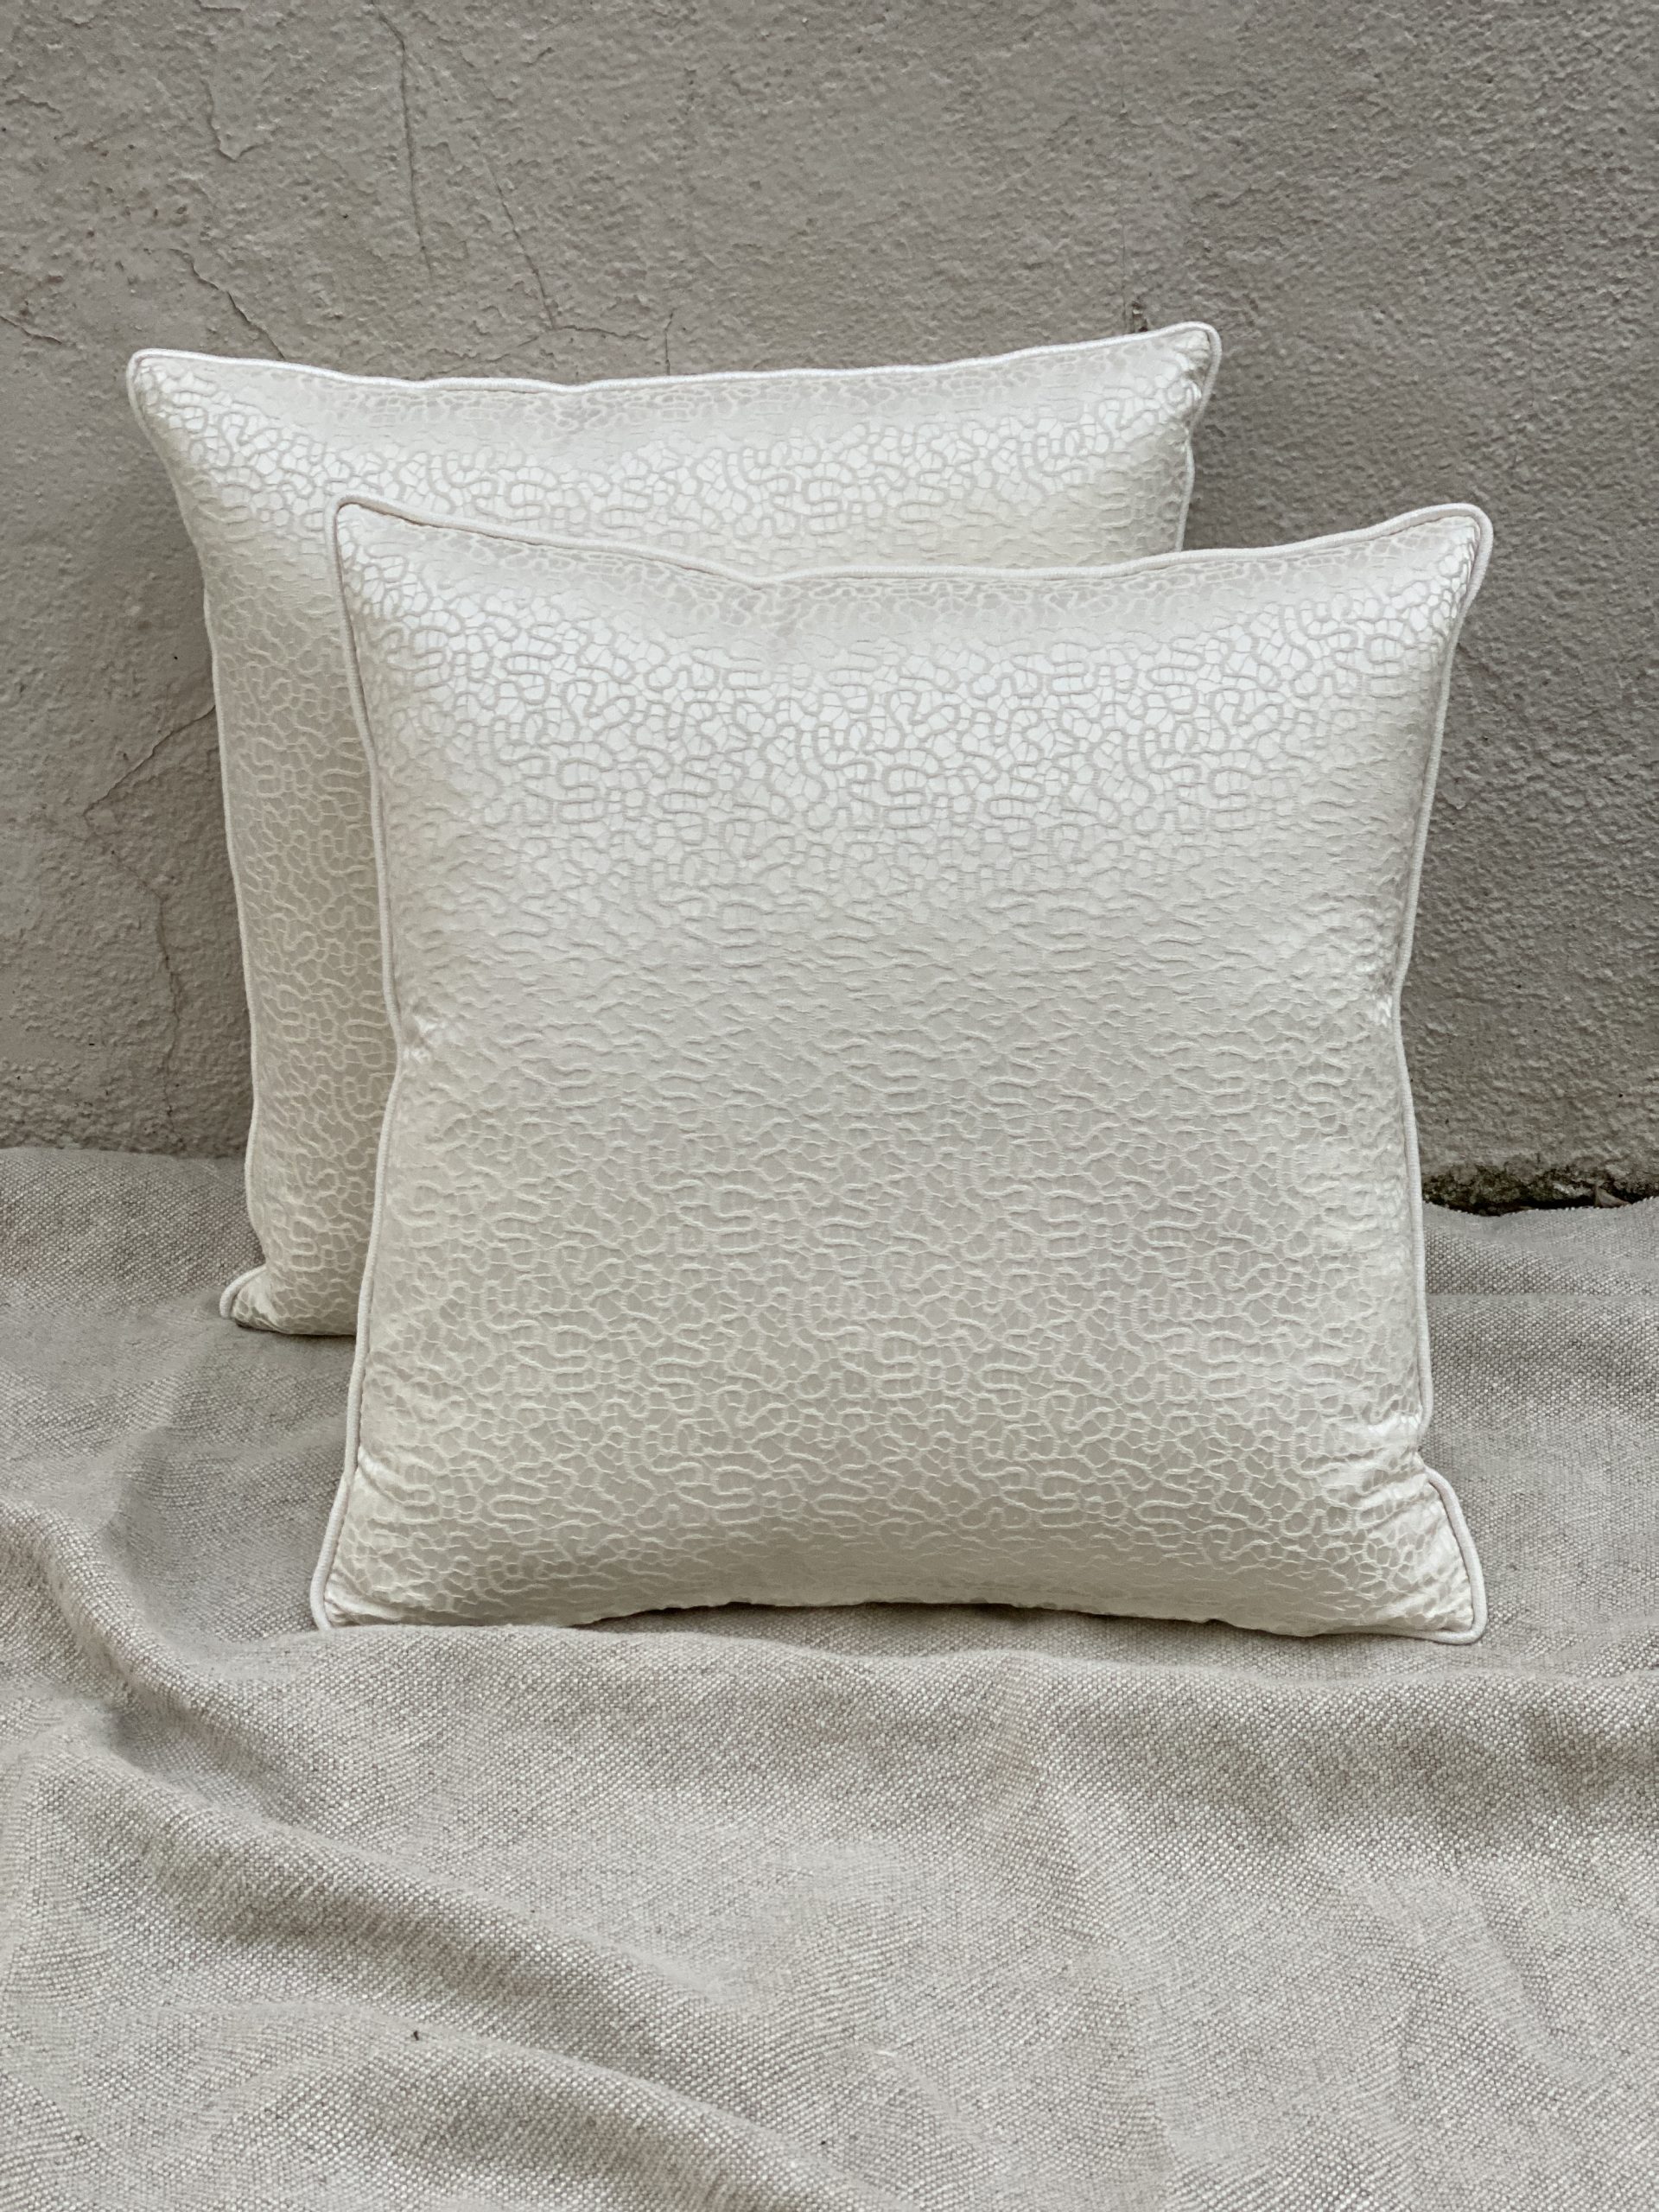 Old World Weavers Pillows